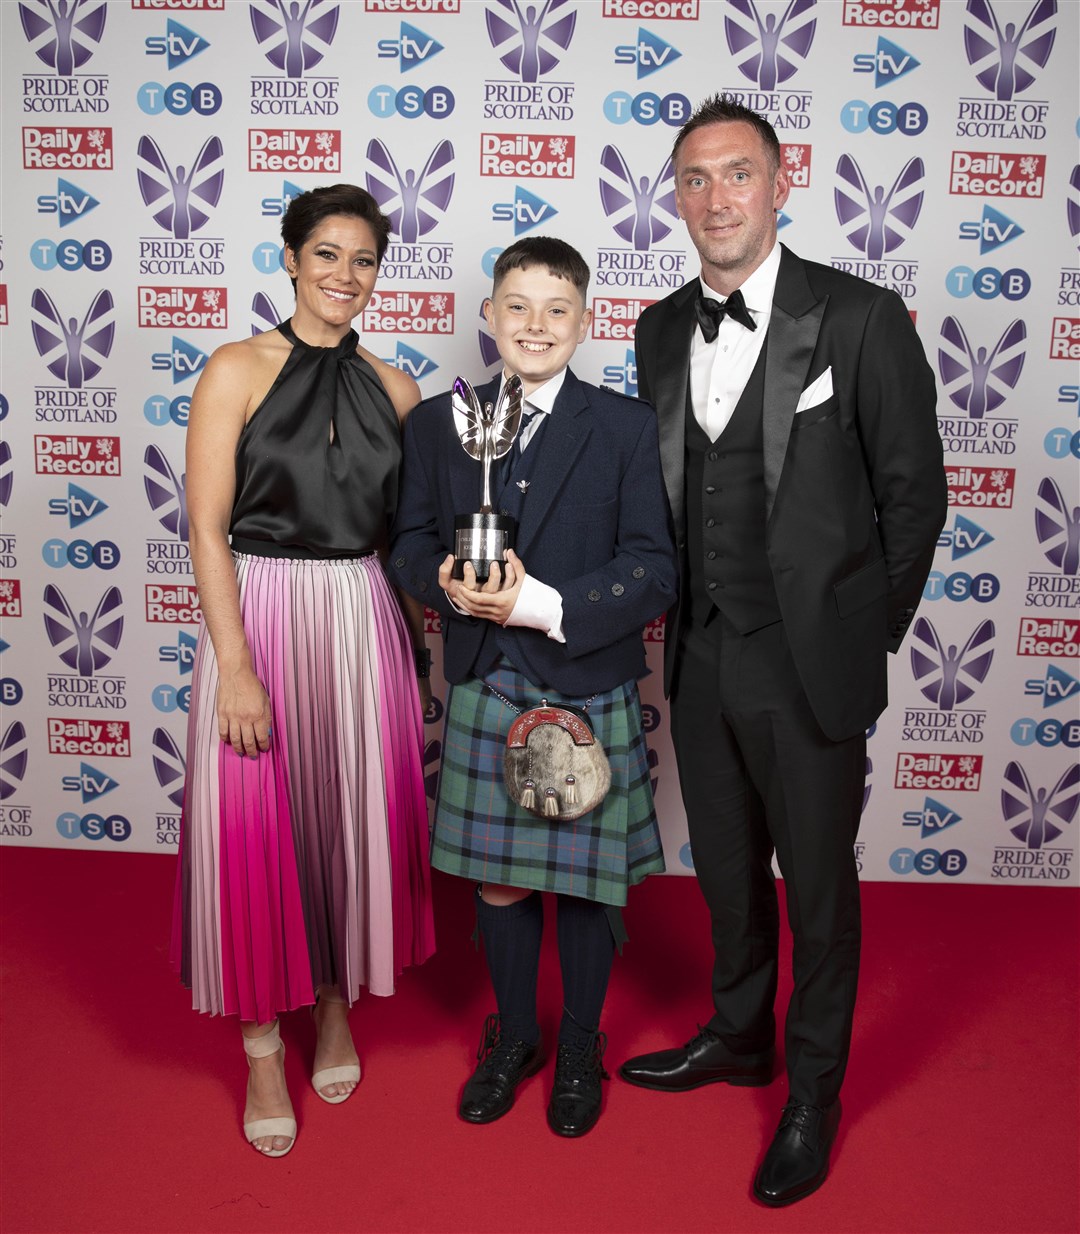 Kieran Reid, winner of the Child of Courage award, with presenters Allan McGregor and Eilidh Barbour at the Pride of Scotland awards ceremony.